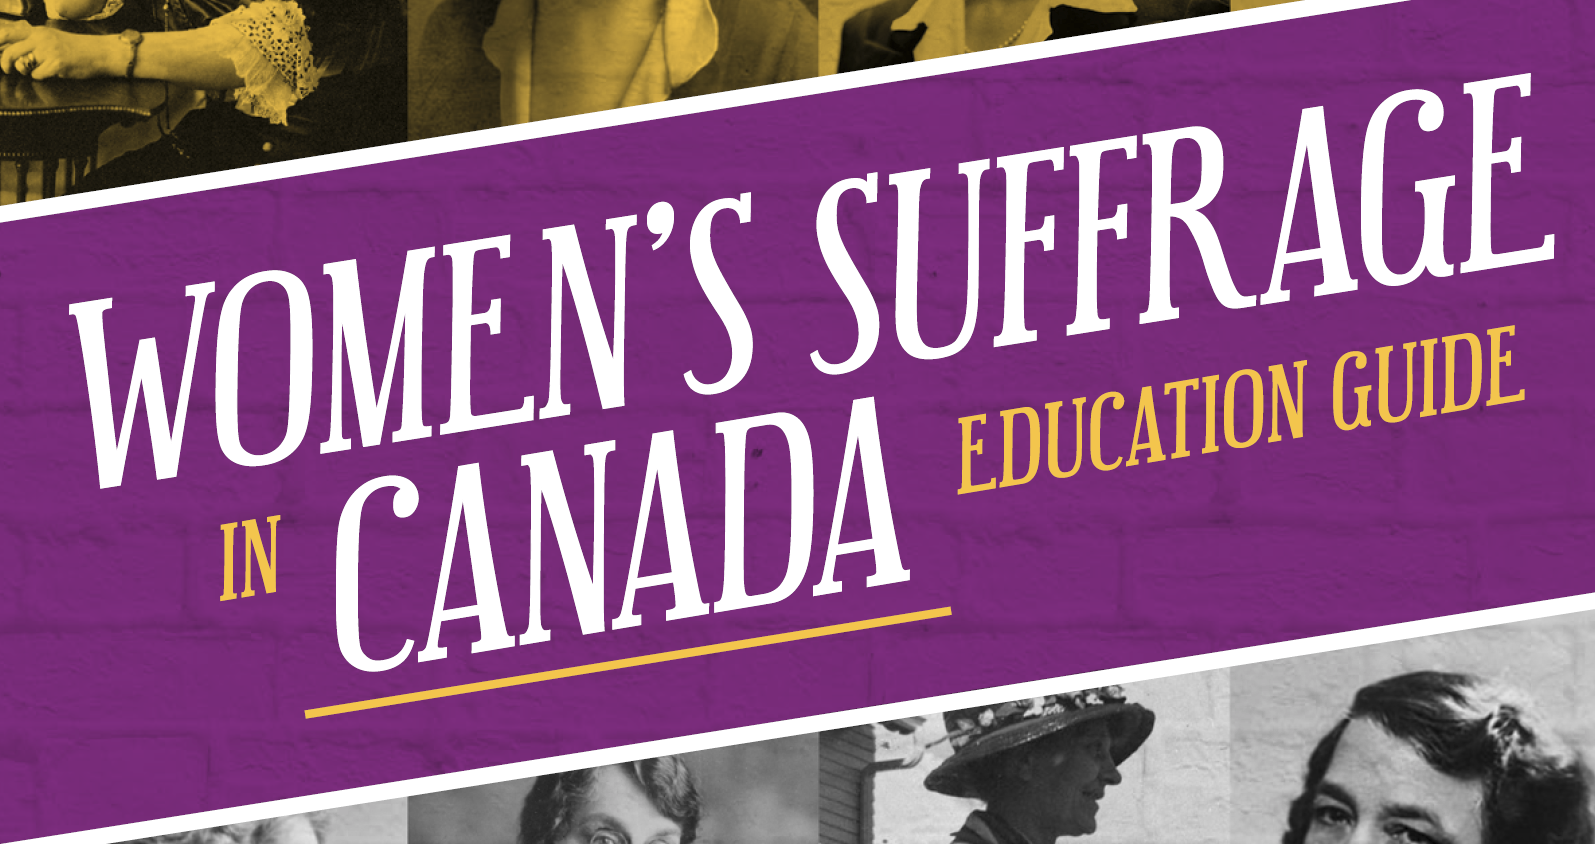 Women's Suffrage in Canada - Education Guide